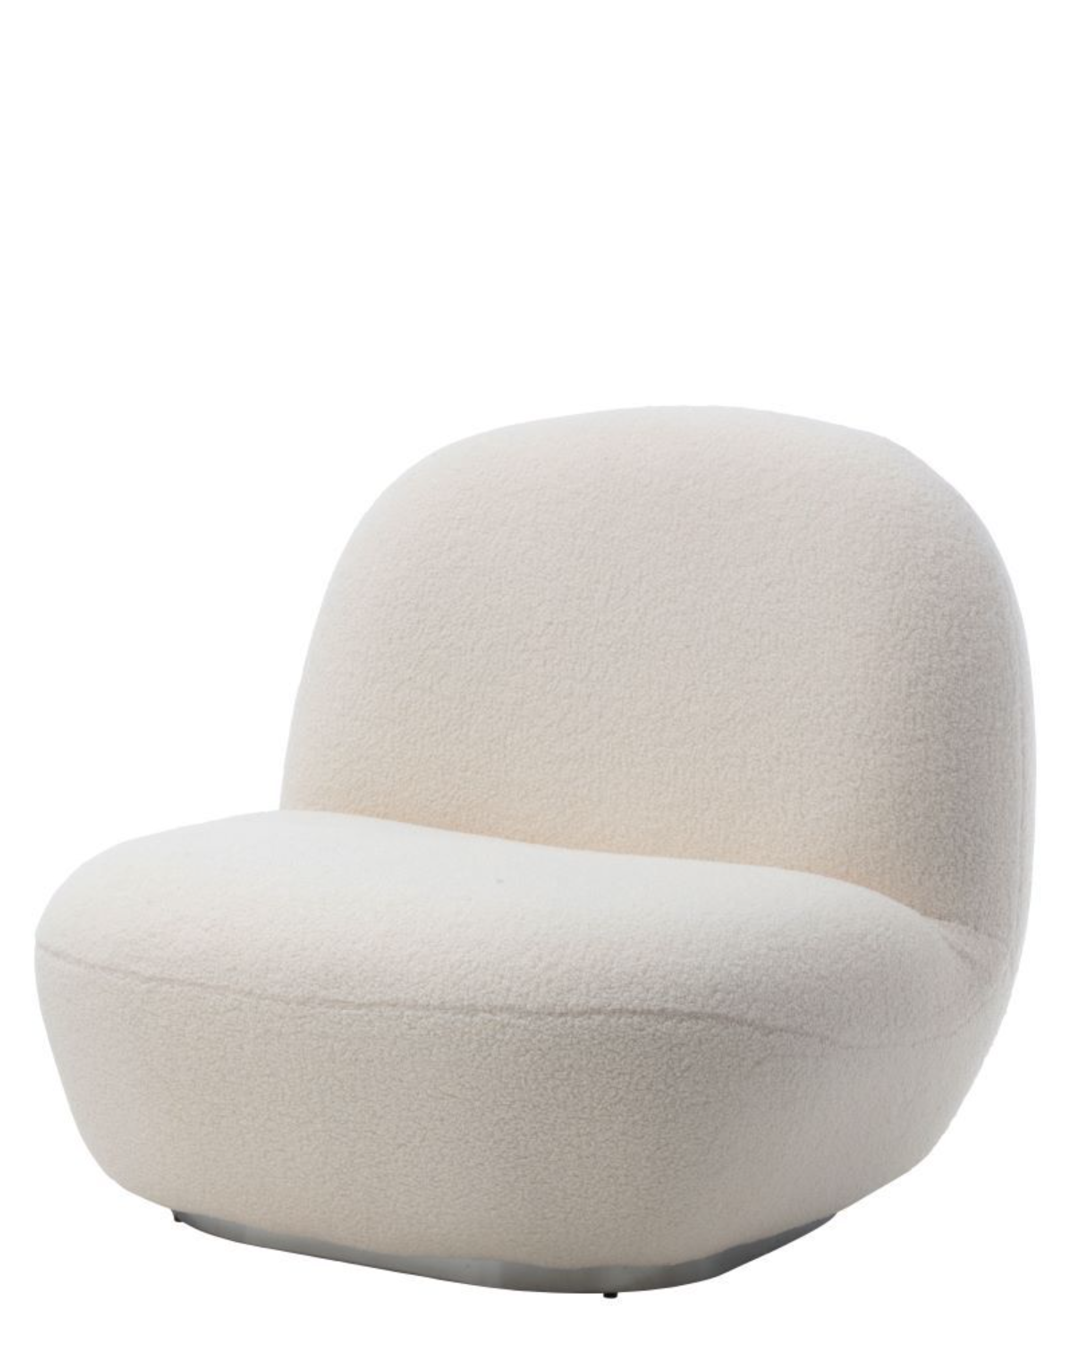 Product image of the Replica Pacha Lounge Chair in Boucle Fabric